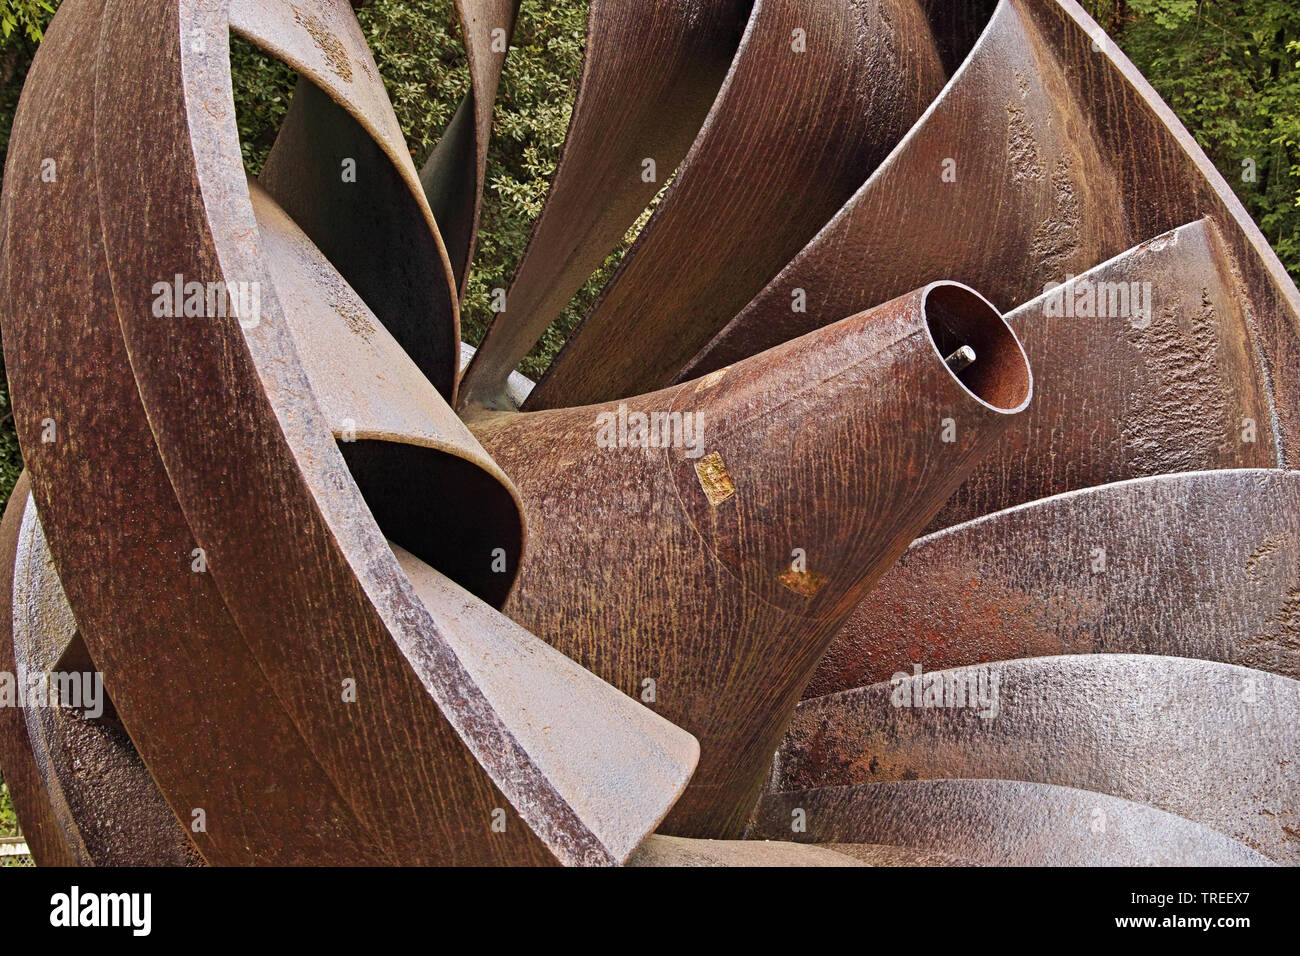 detail of a disused Francis hydraulic turbine Stock Photo